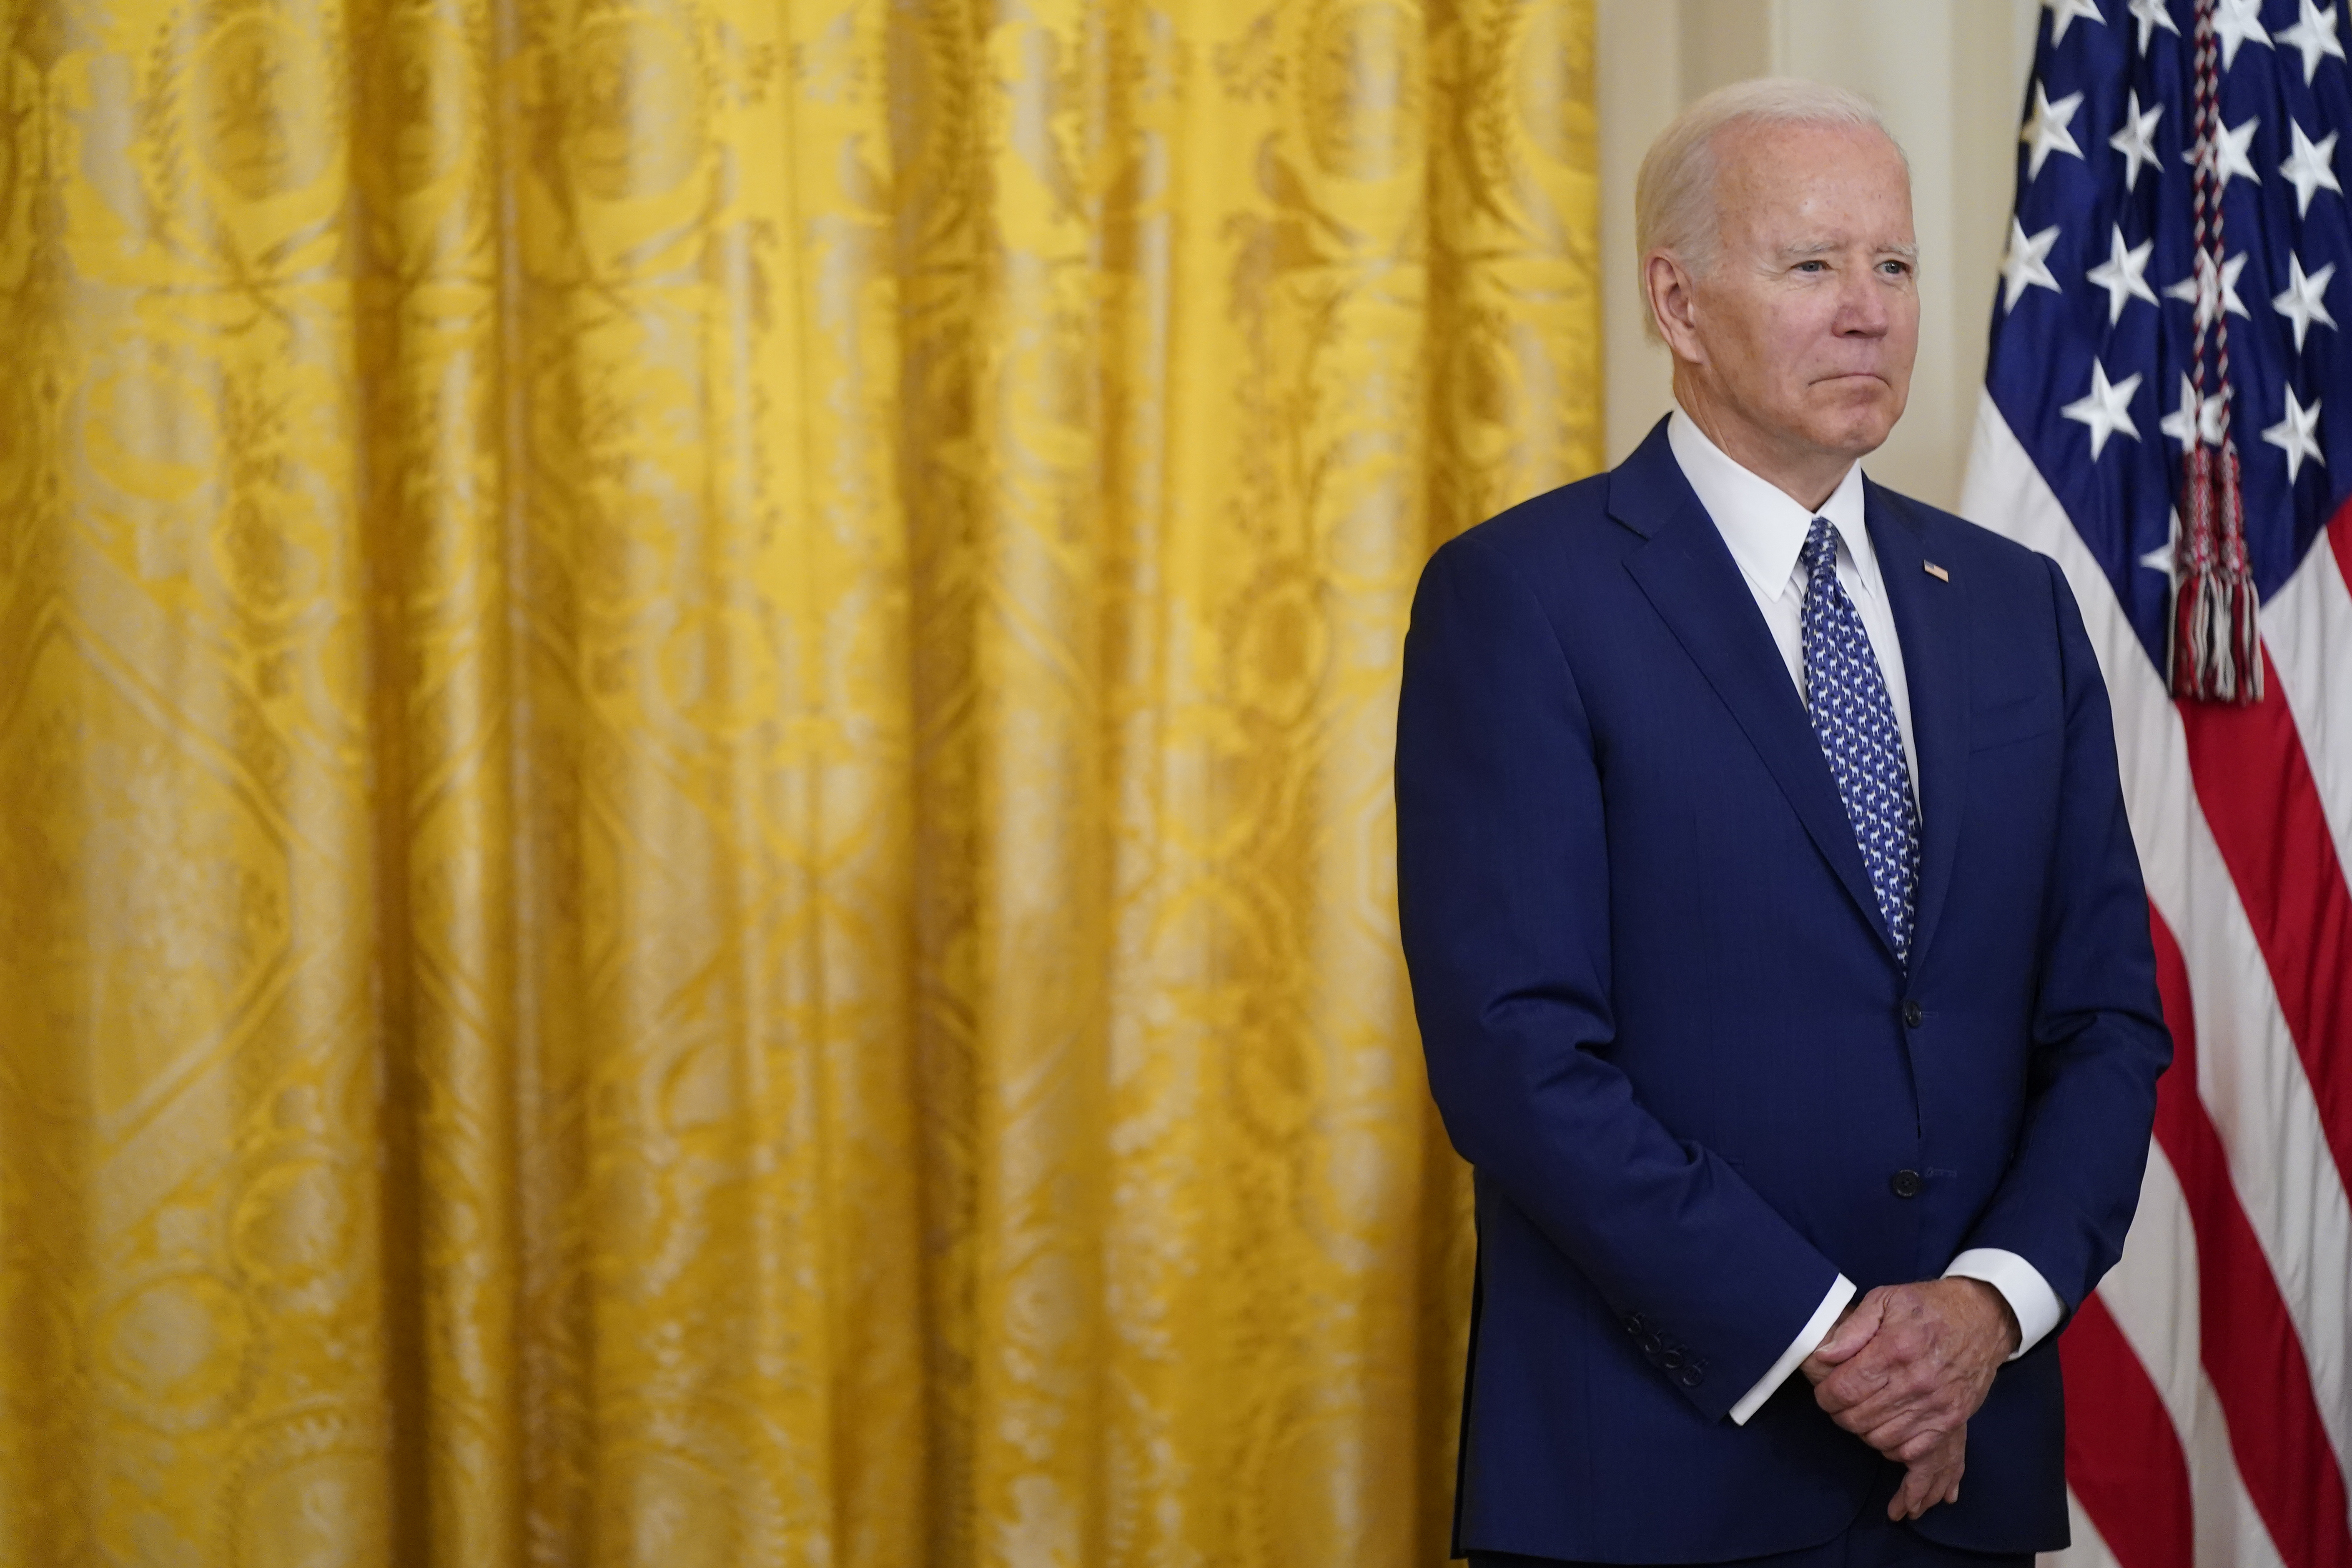 President Joe Biden waits to speak at a bill signing ceremony for the "Commission To Study the Potential Creation of a National Museum of Asian Pacific American History and Culture Act," Monday, June 13, 2022, in the East Room of the White House in Washington. (AP Photo/Patrick Semansky)